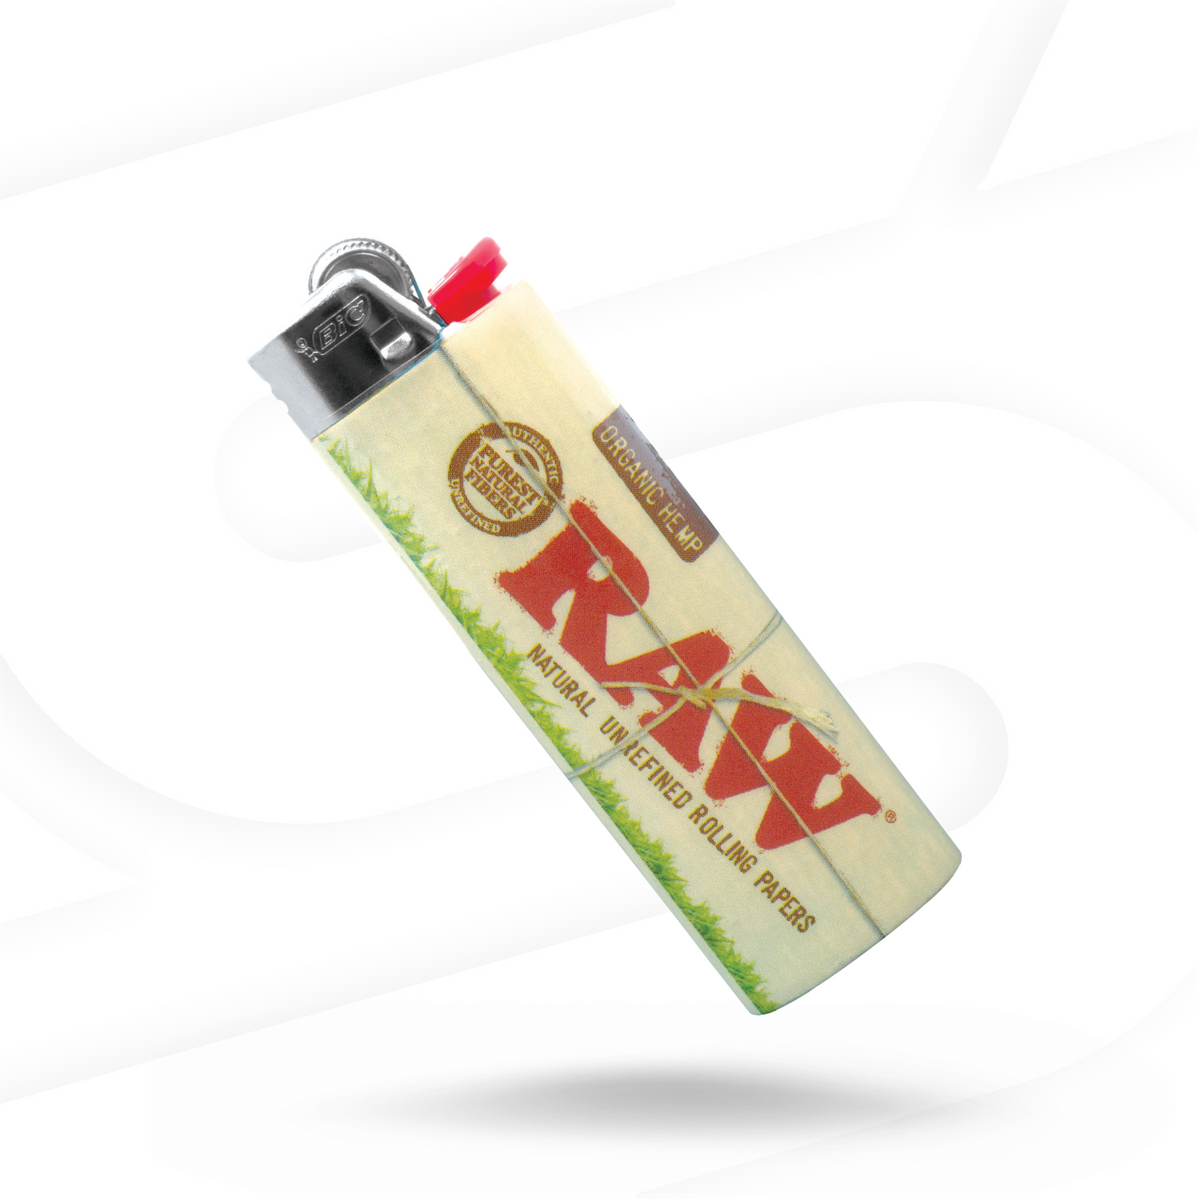 RAW X BIC Lighter Accessories esd-official